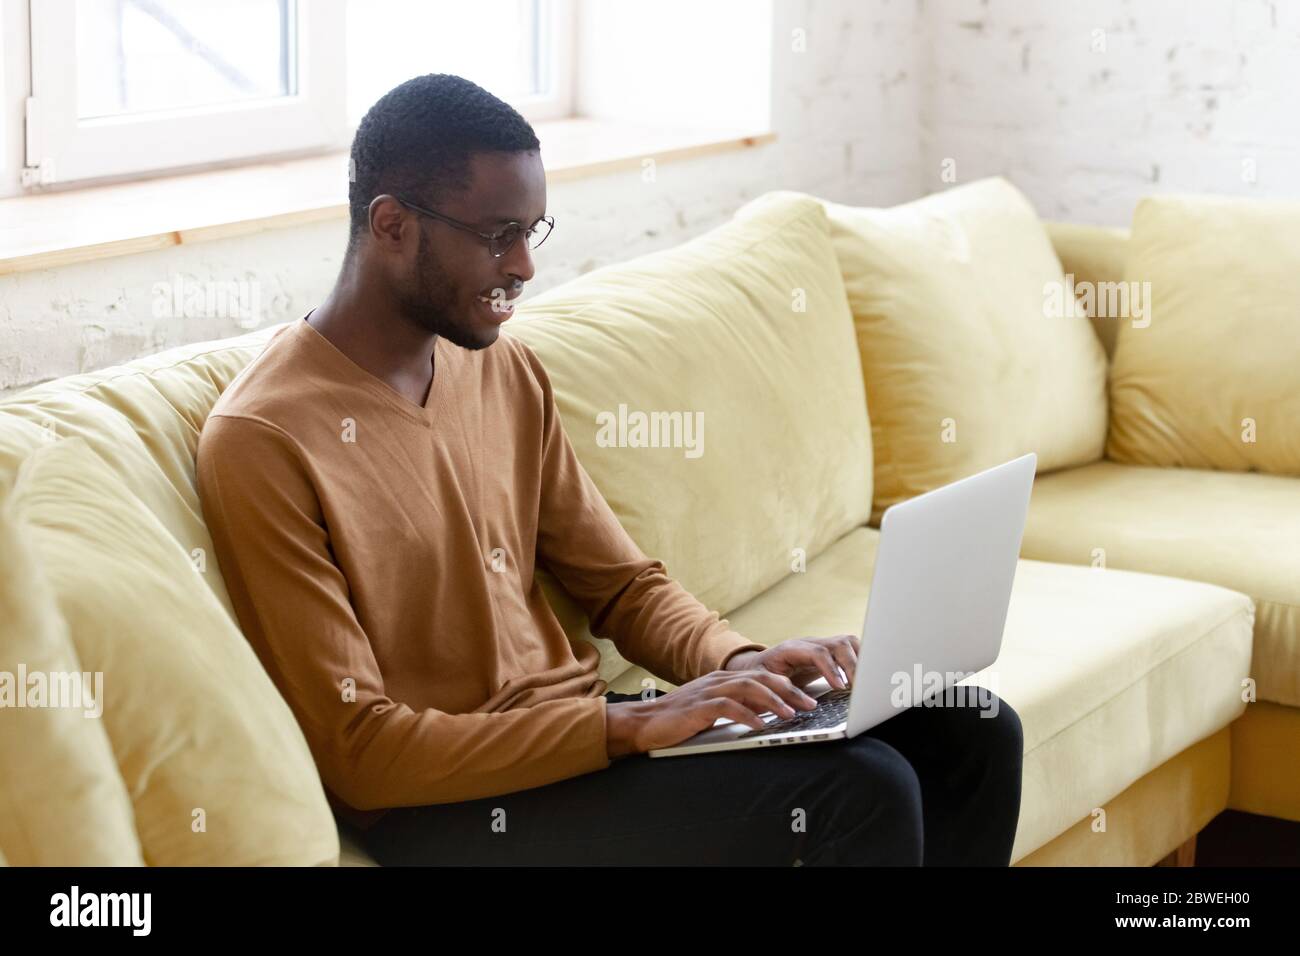 African man sitting on couch typing business letter on laptop Stock Photo